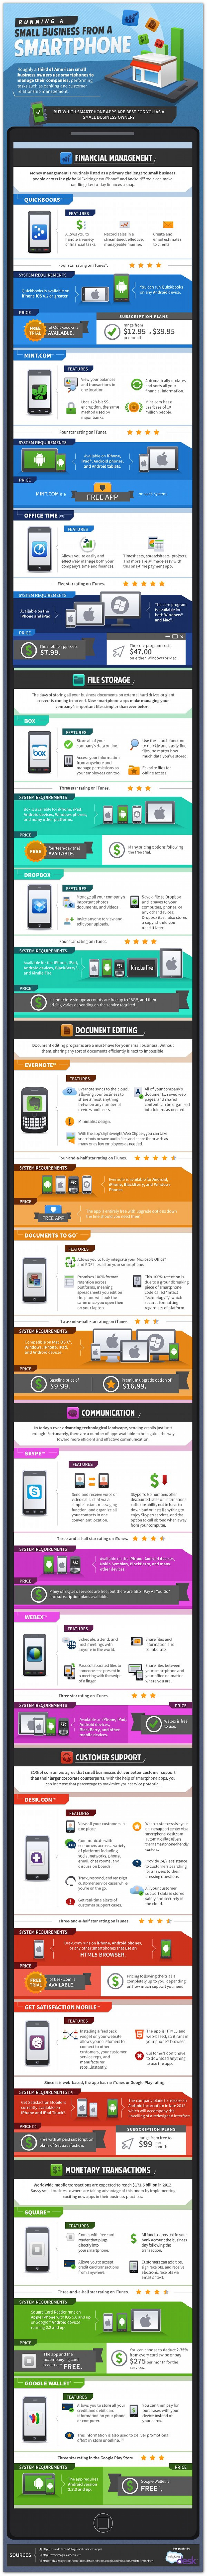 13 Business Apps for Busy Entrepreneurs Infographic